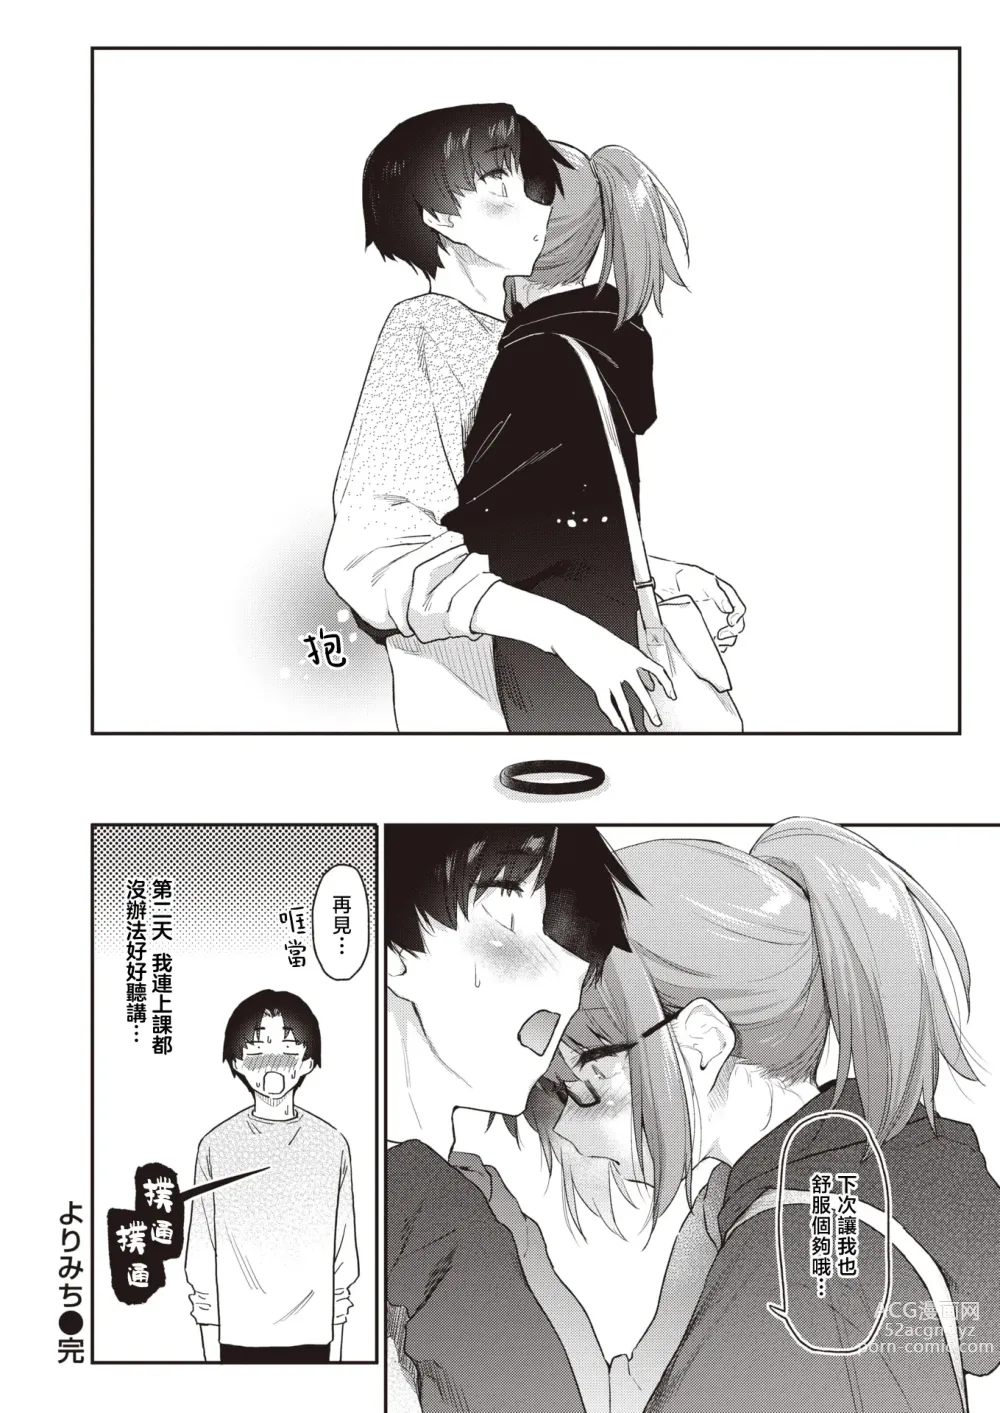 Page 28 of doujinshi 自用